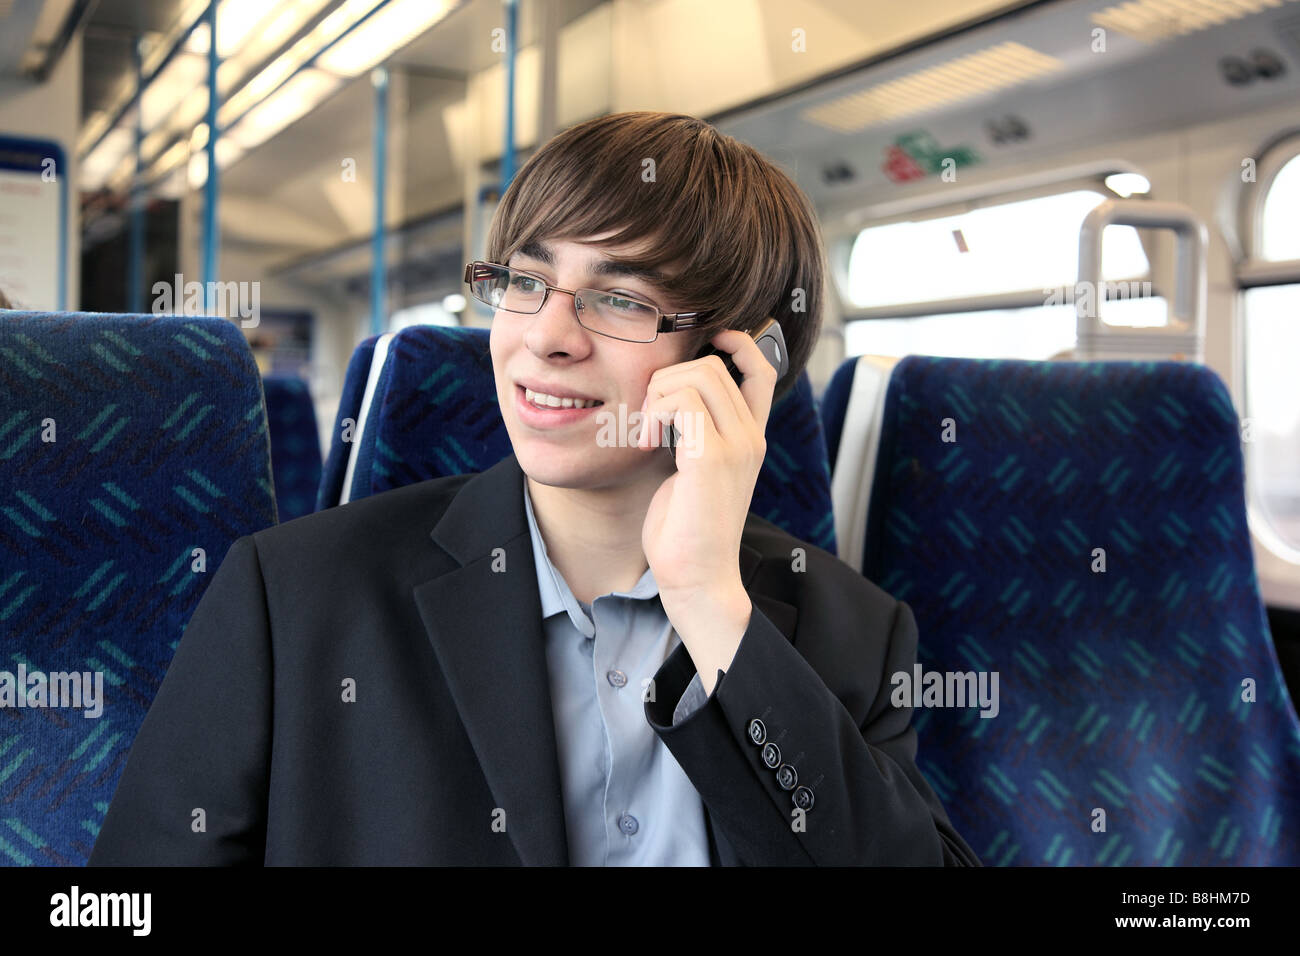 A young male using a mobile or cell phone on a train Stock Photo